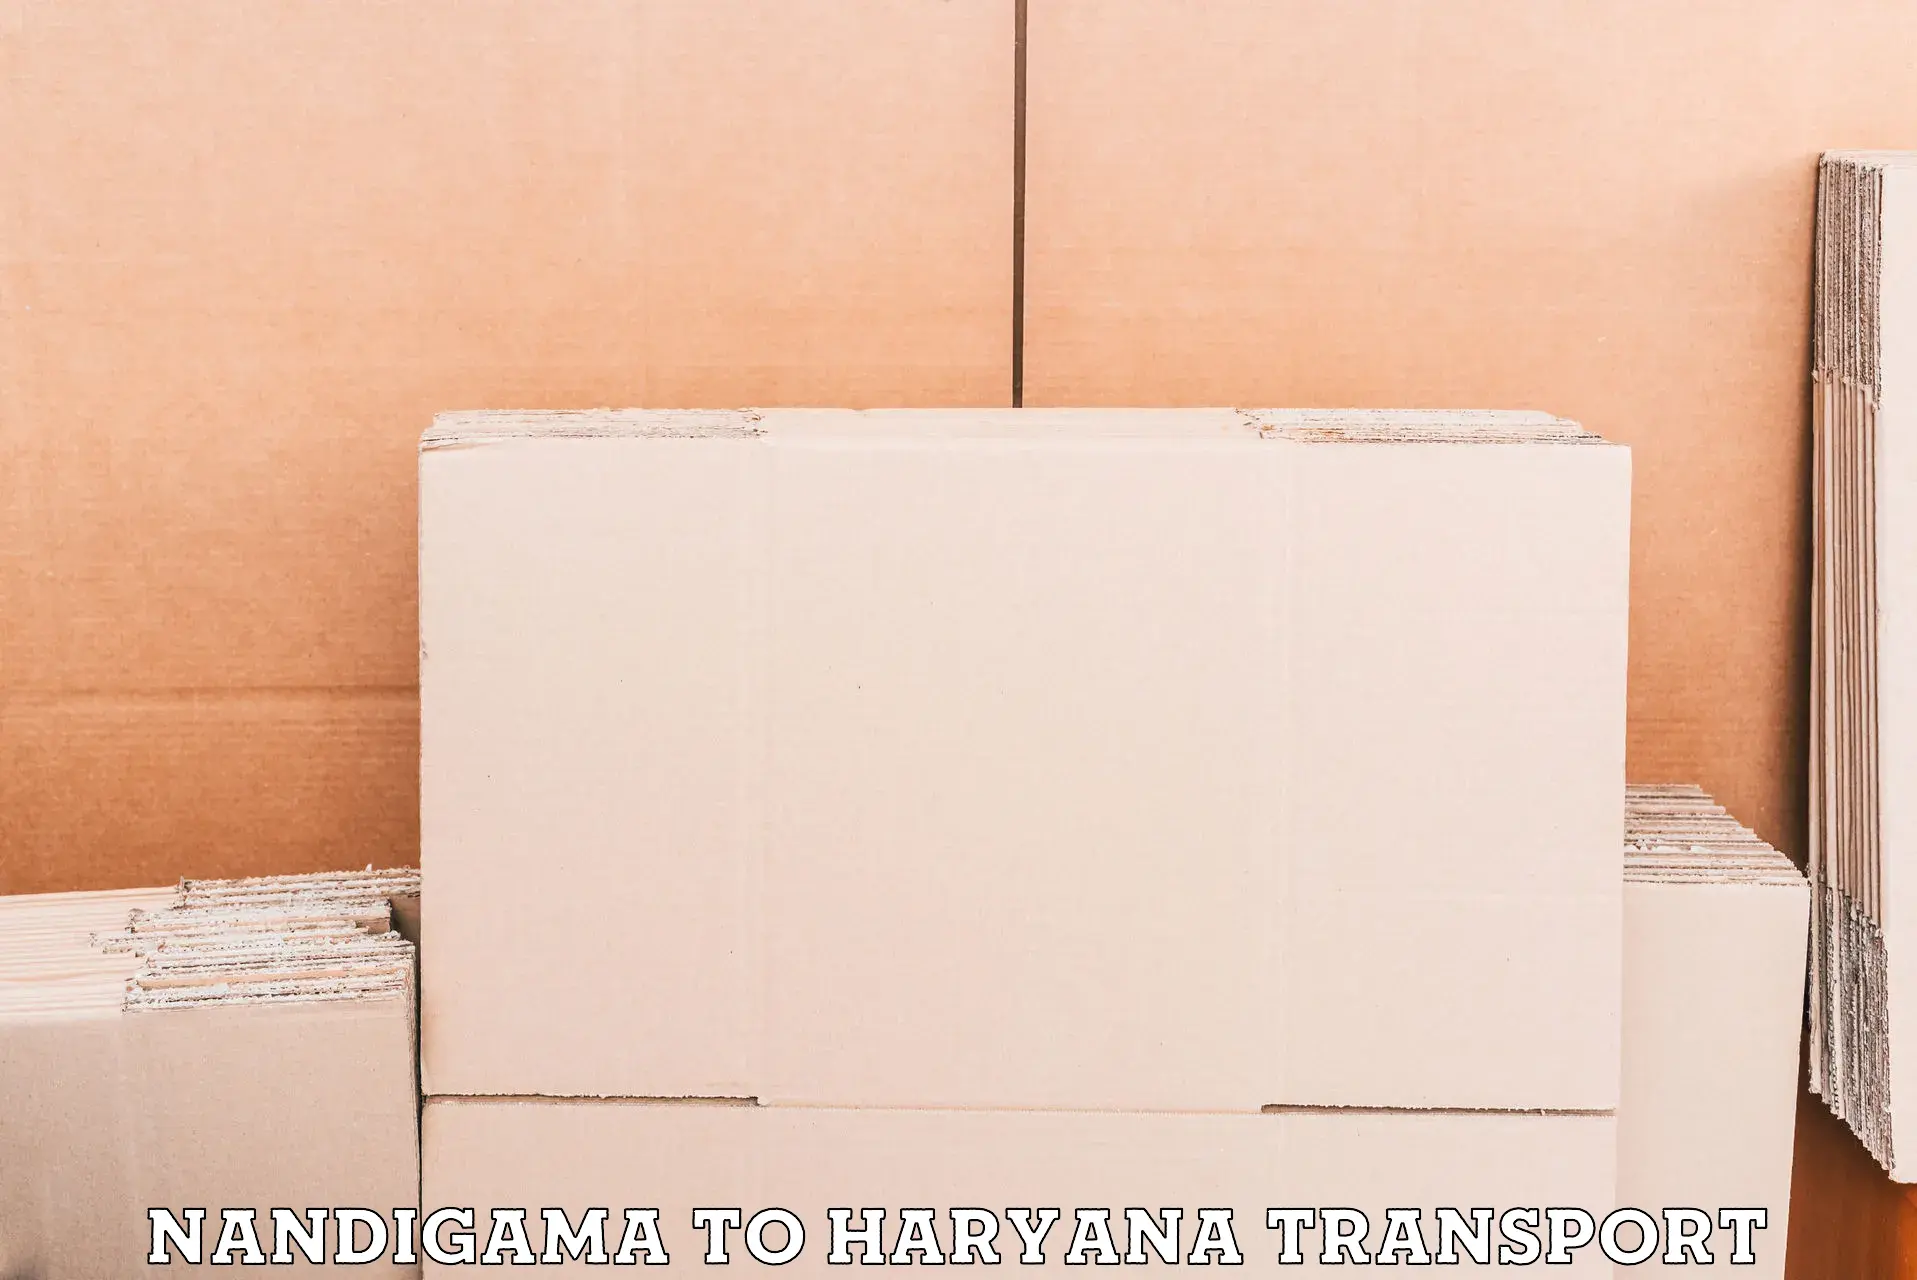 Delivery service Nandigama to Haryana